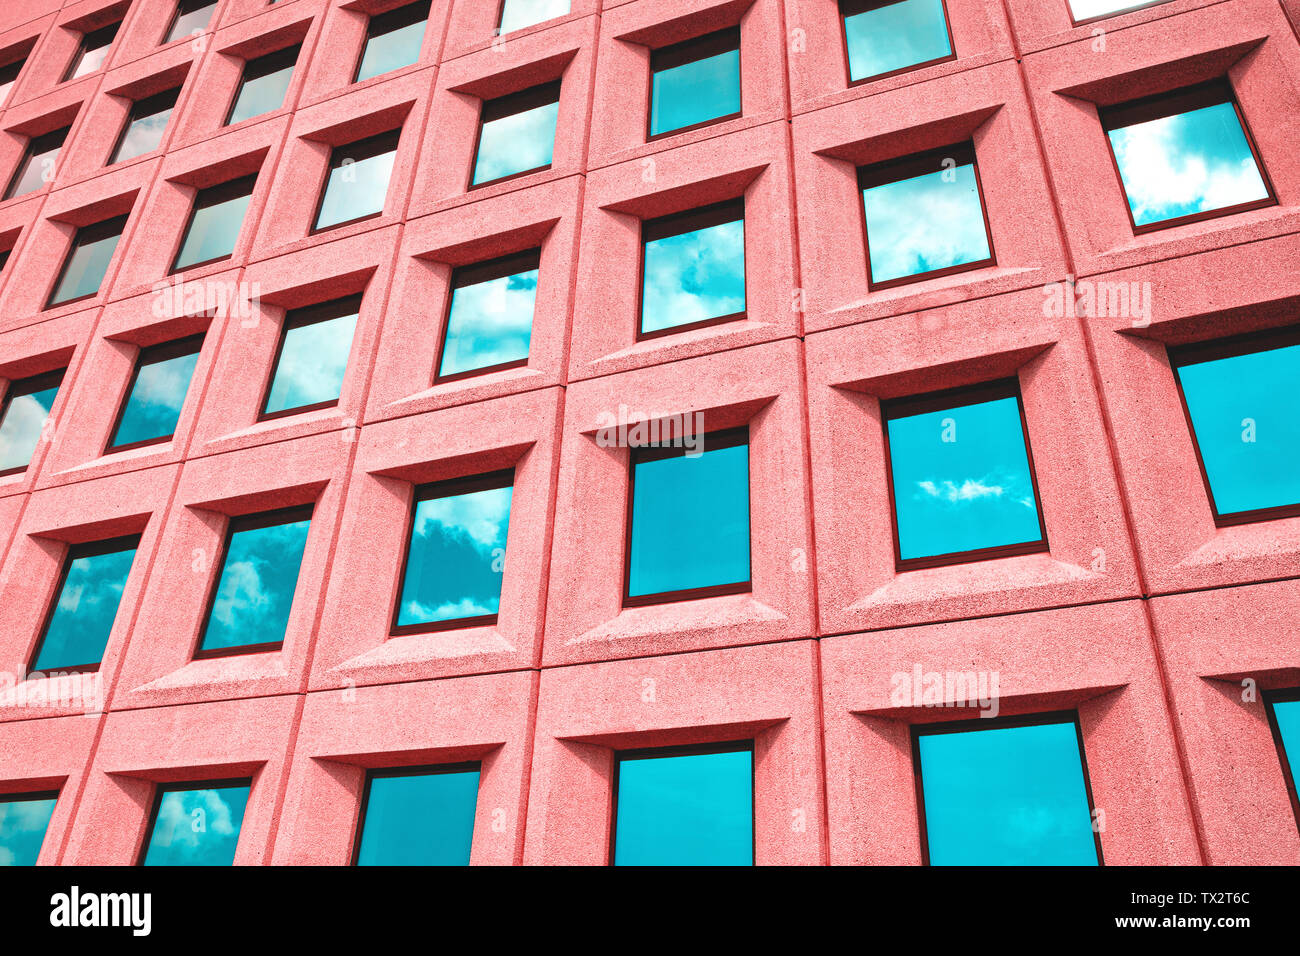 Regular pattern of windows in a colorful building Stock Photo